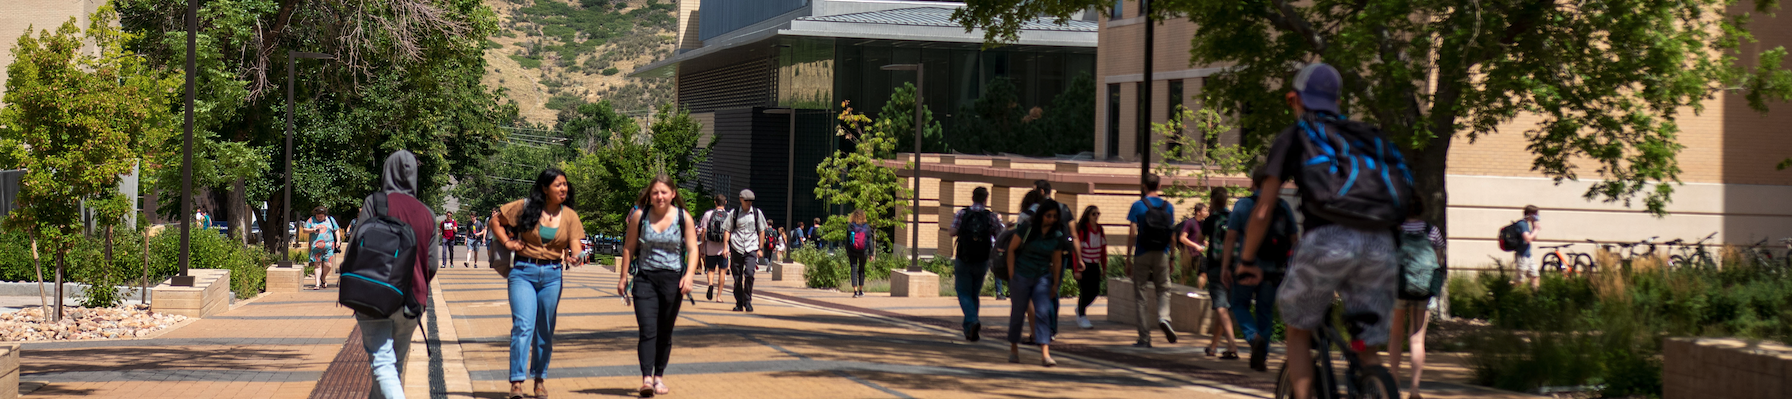 Students walking through bustling part of campus.